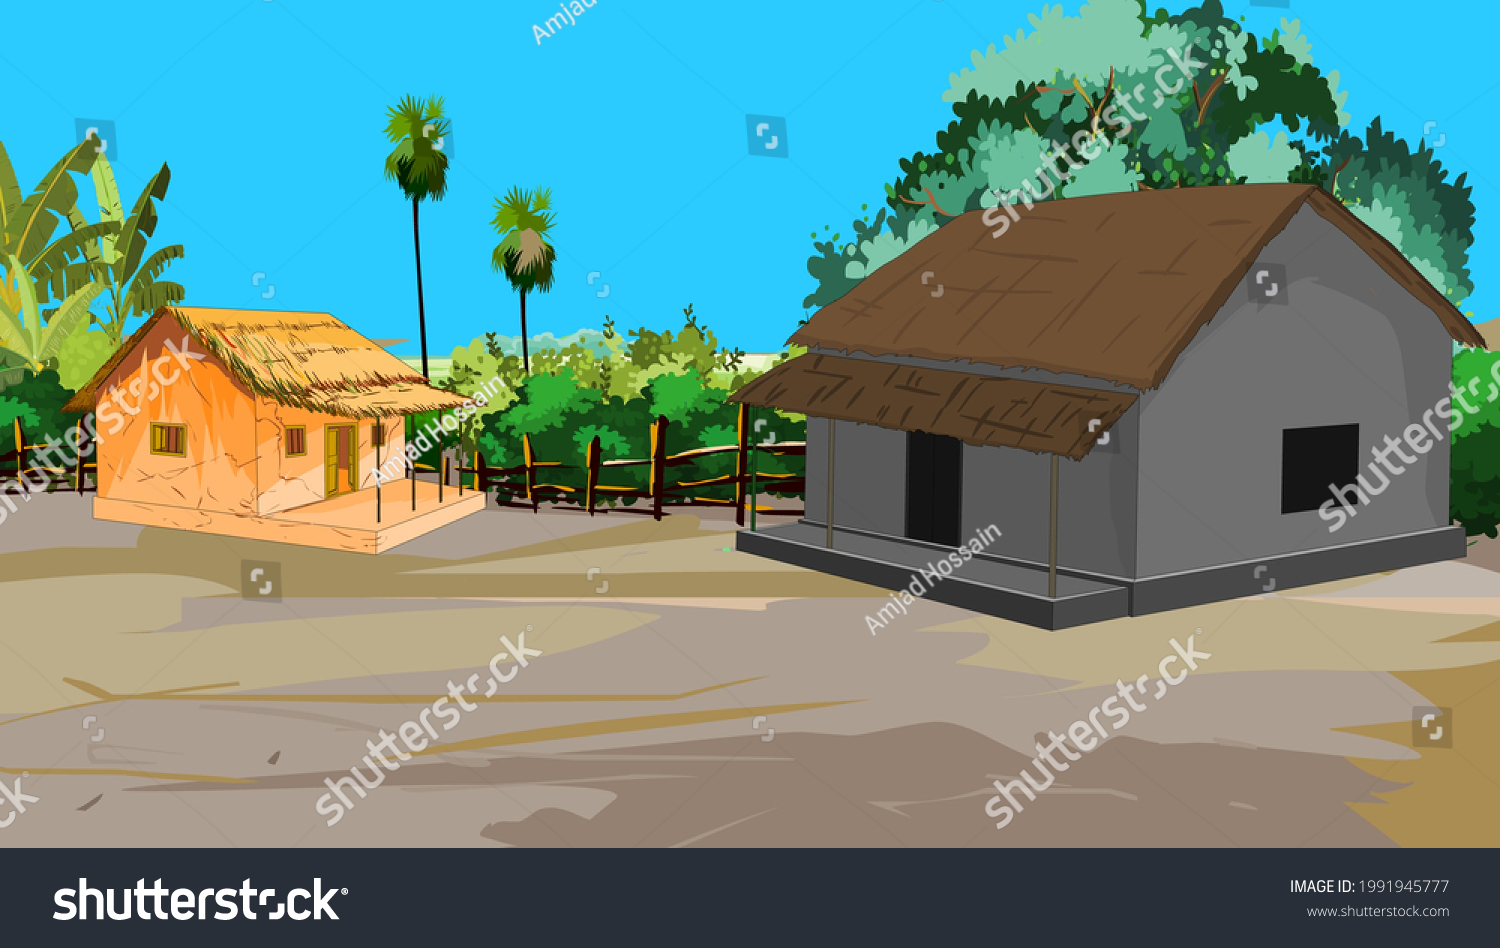 Village in two House illustration  #1991945777